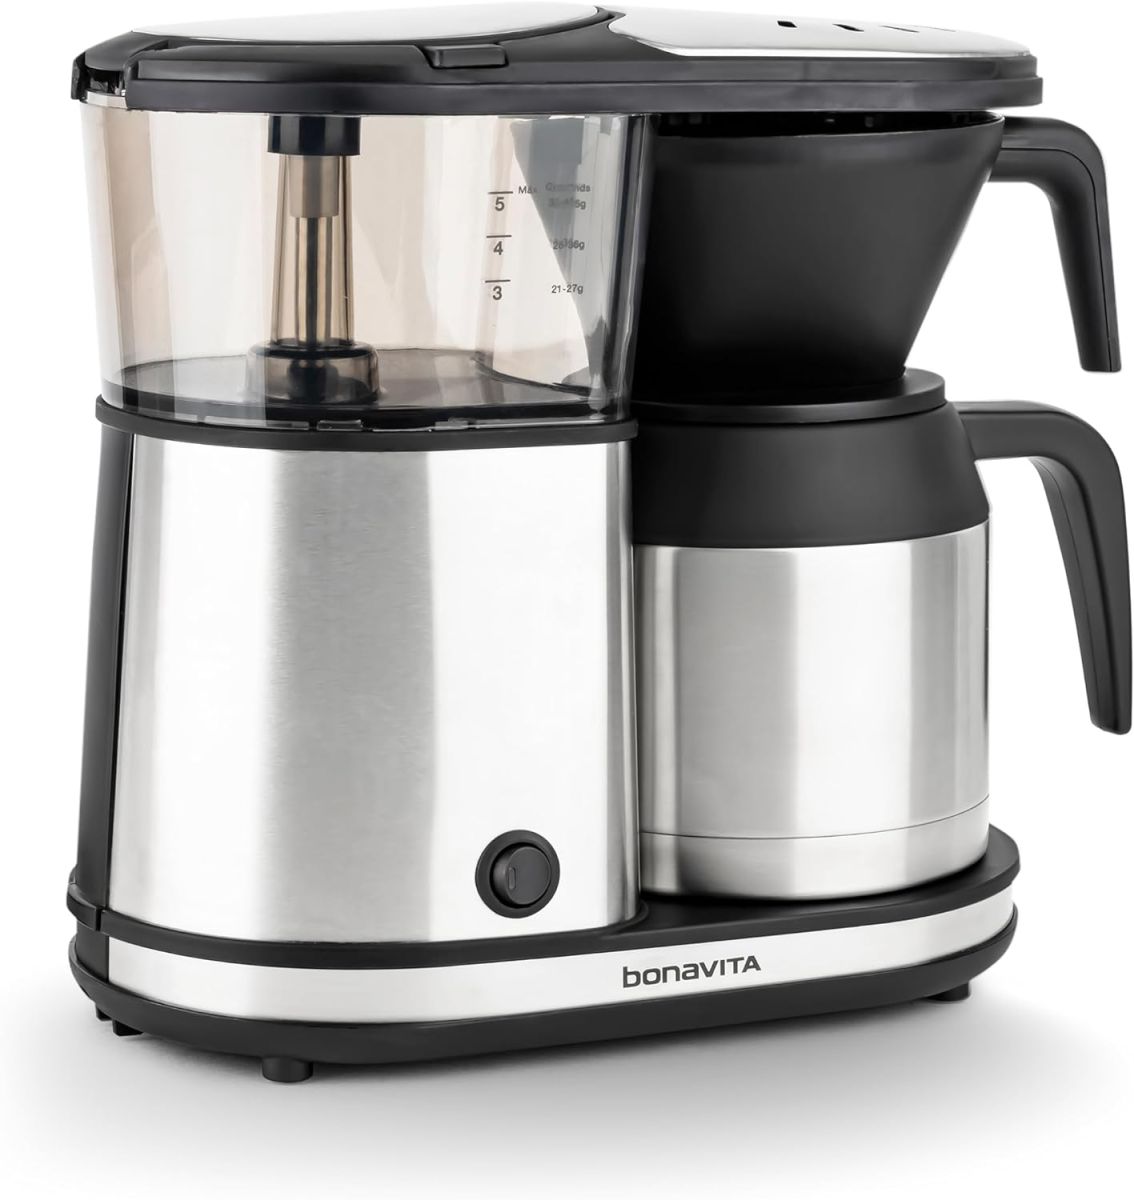 Bonavita BV1500ts features an ergonomic handle to help you grab the kettle and pour water.